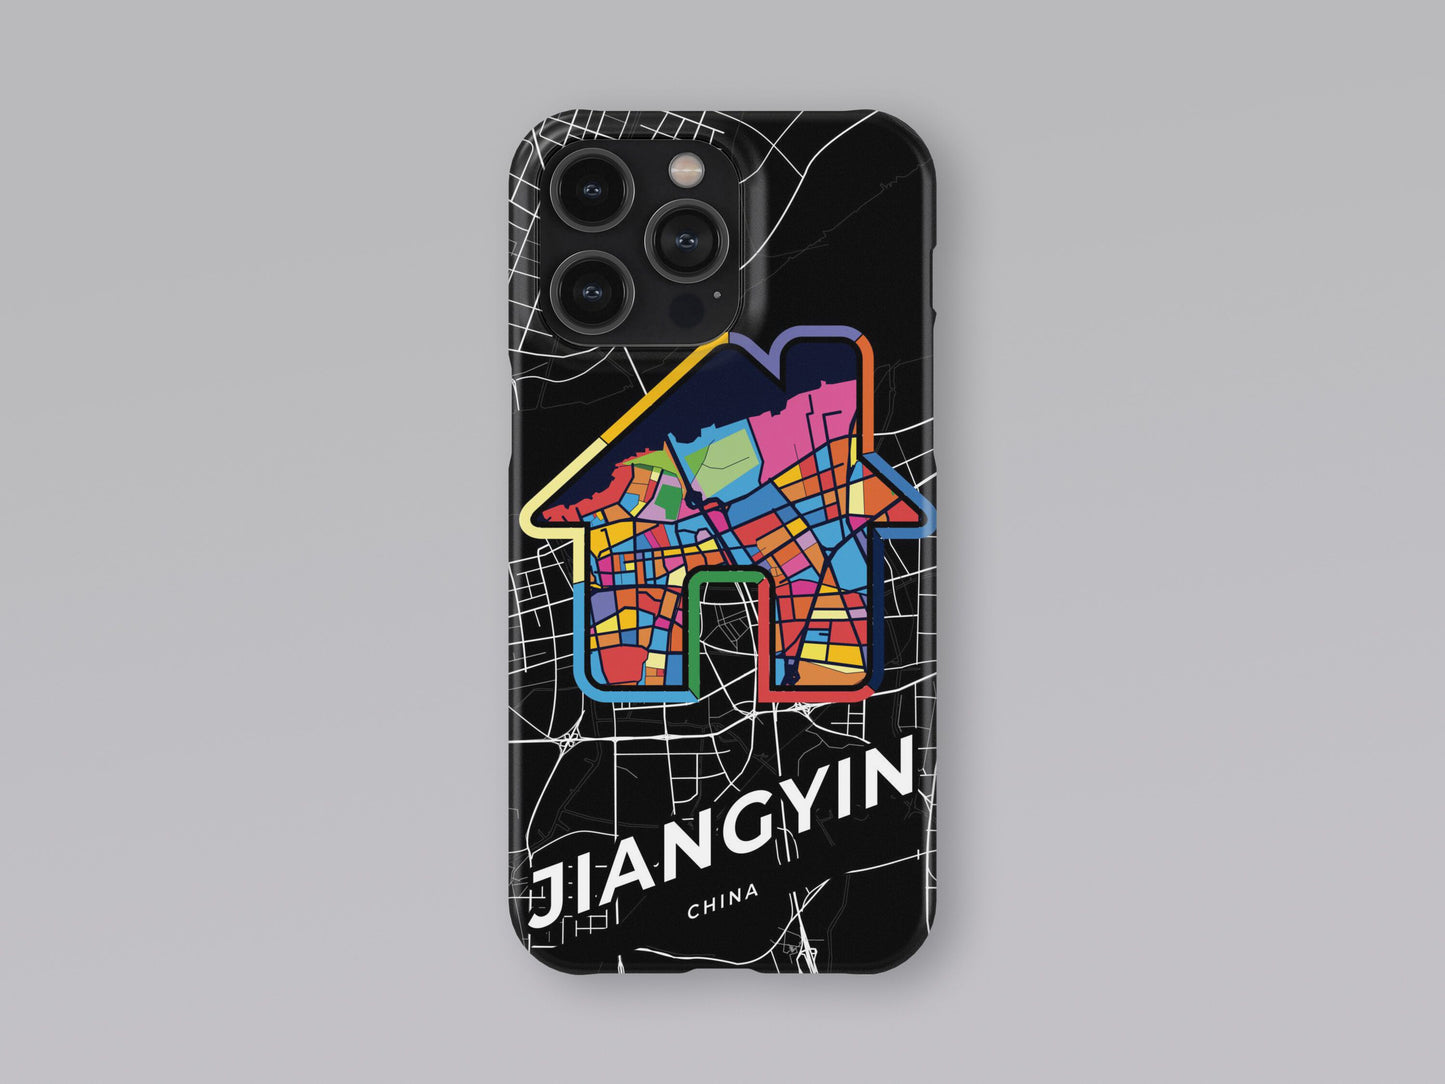 Jiangyin China slim phone case with colorful icon. Birthday, wedding or housewarming gift. Couple match cases. 3